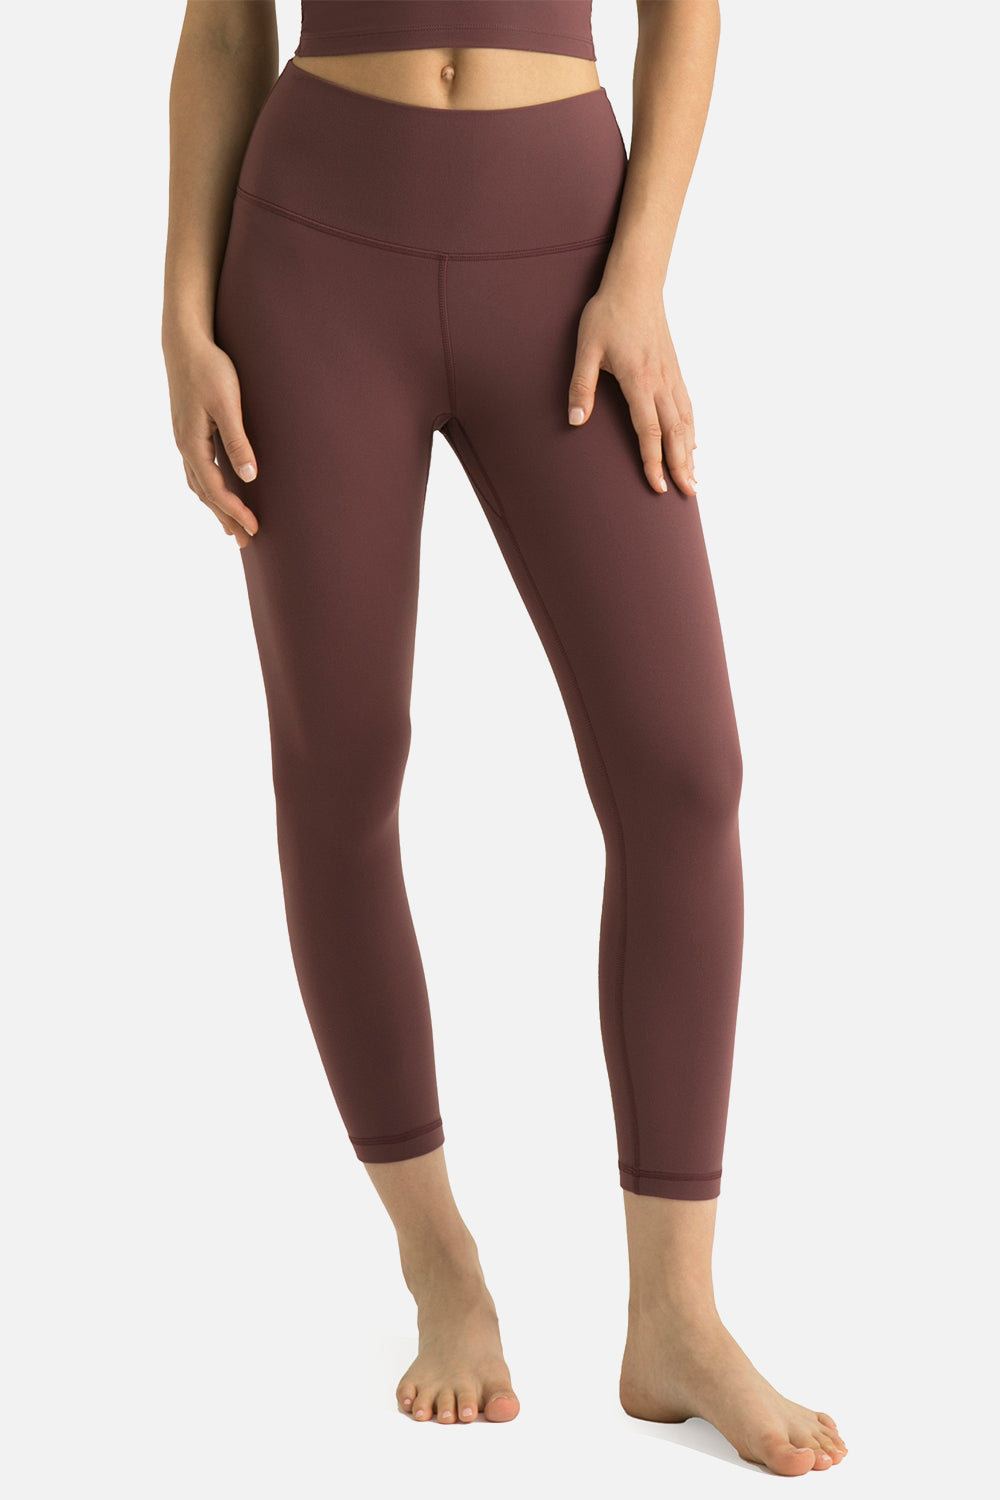 Dreamlux Flared Legging with Zippered Pockets 29.5 / 31.5 Inseam - 29.5''  / Plum Red / XS